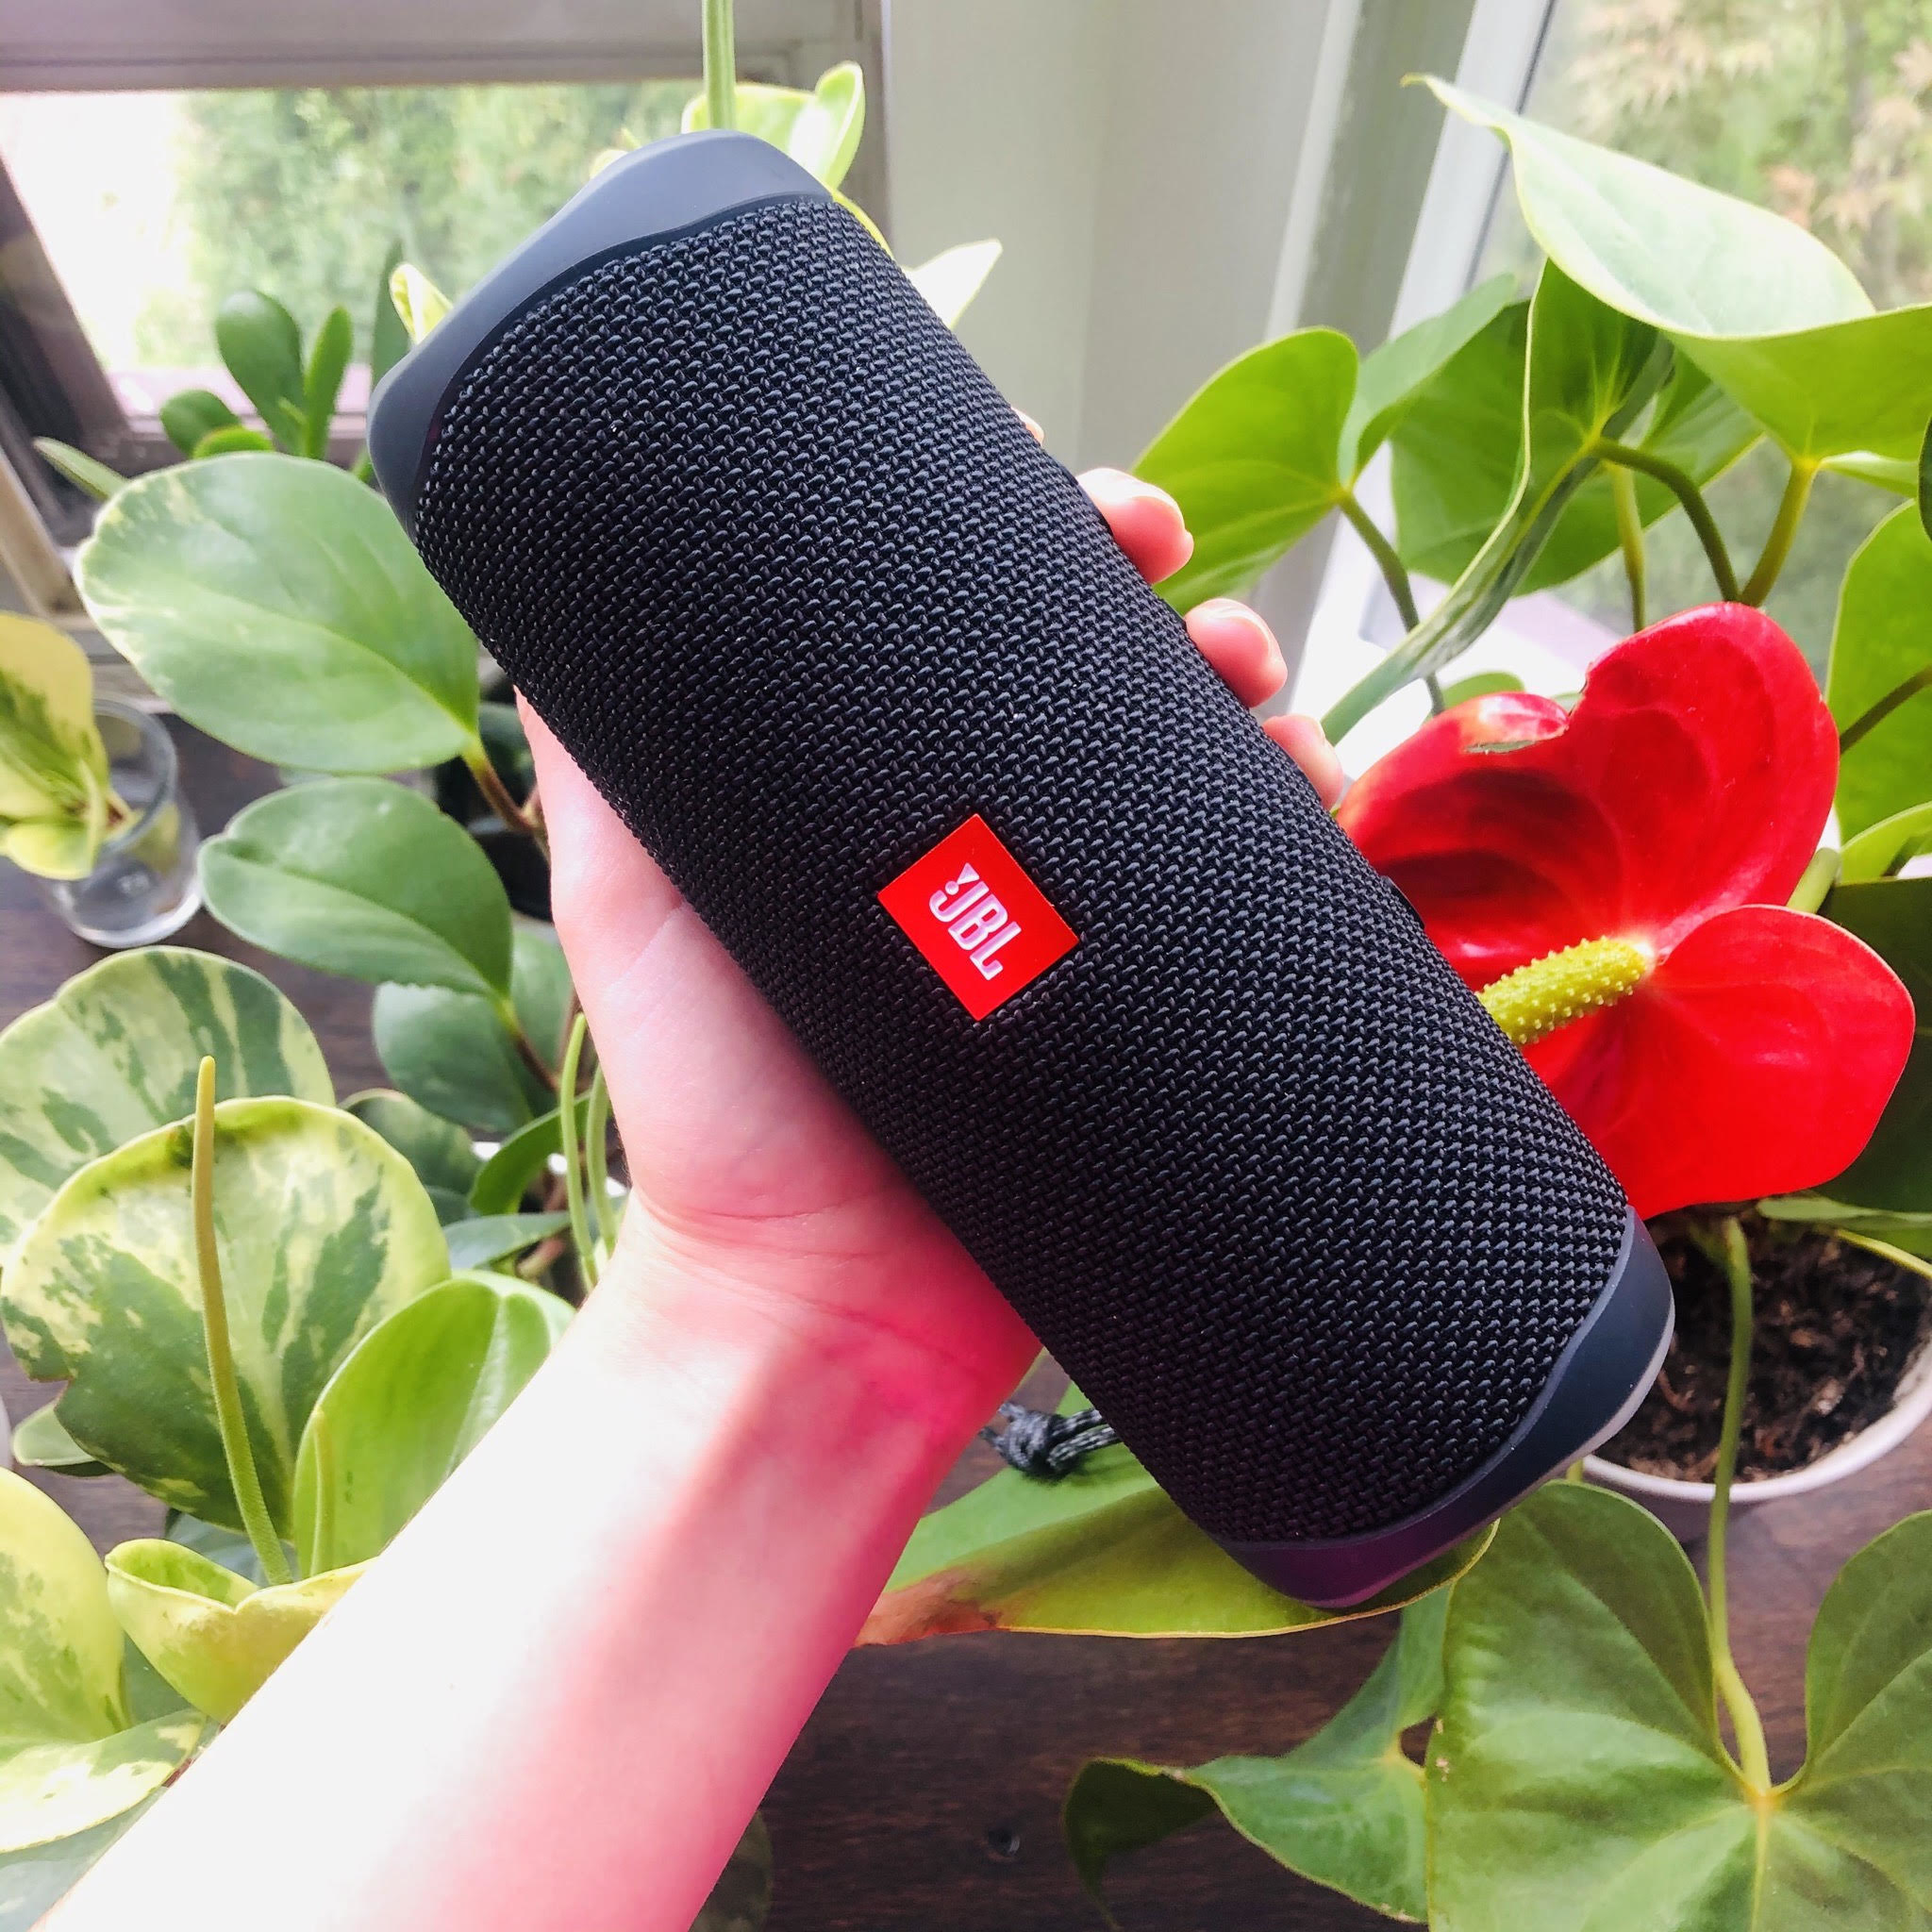 A person holding the JBL speaker in front of a plant